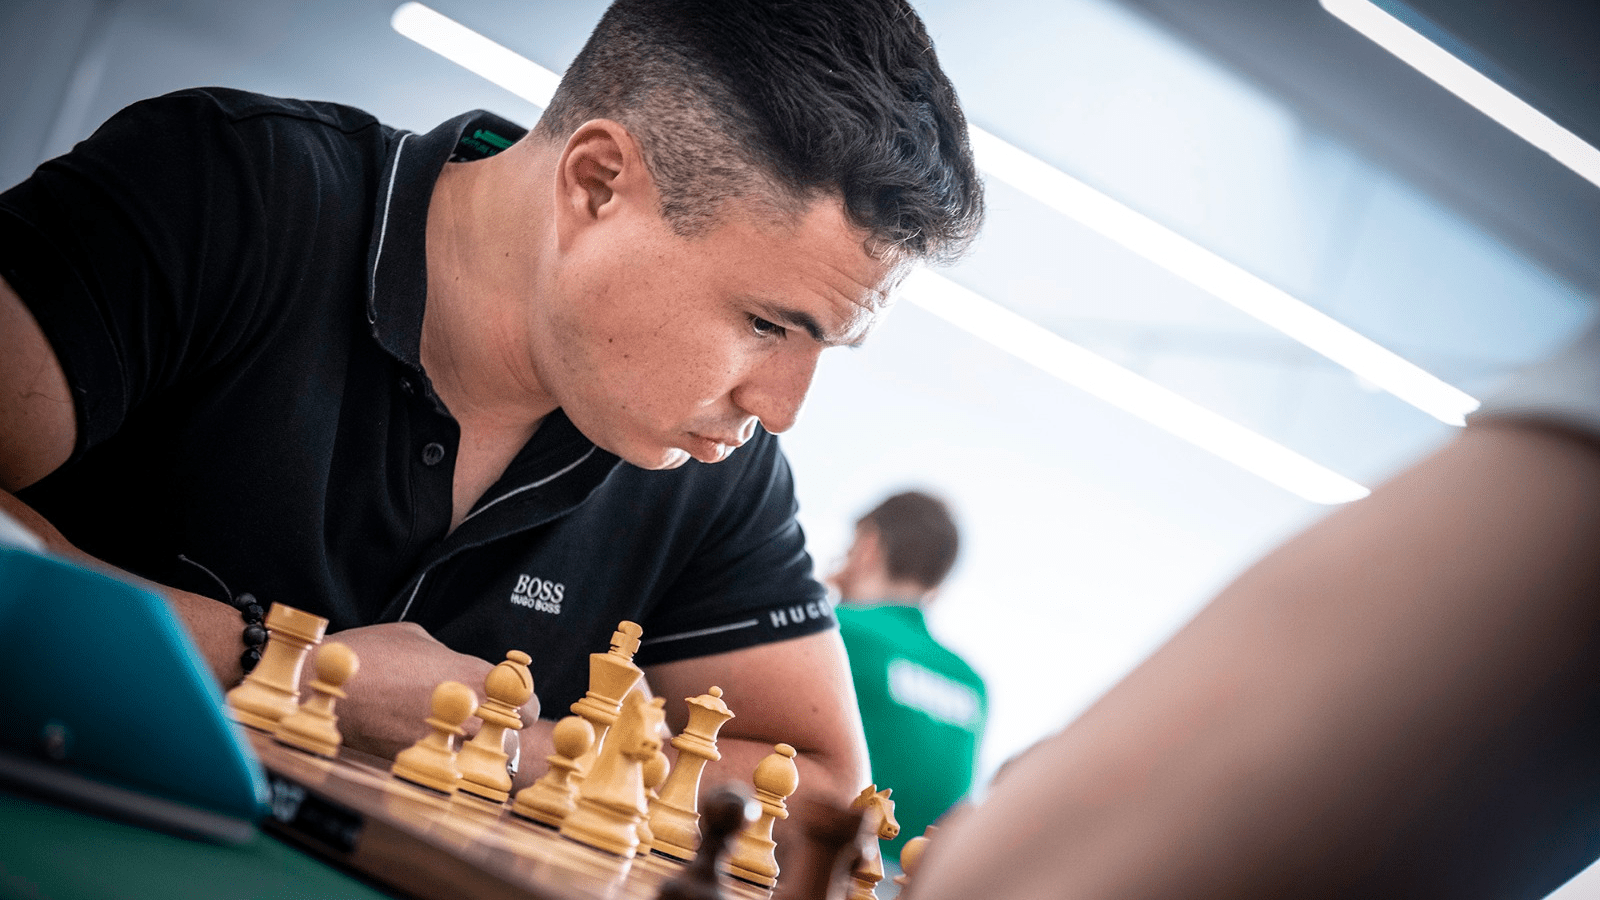 Visually Impaired Player Achieves Grandmaster Title